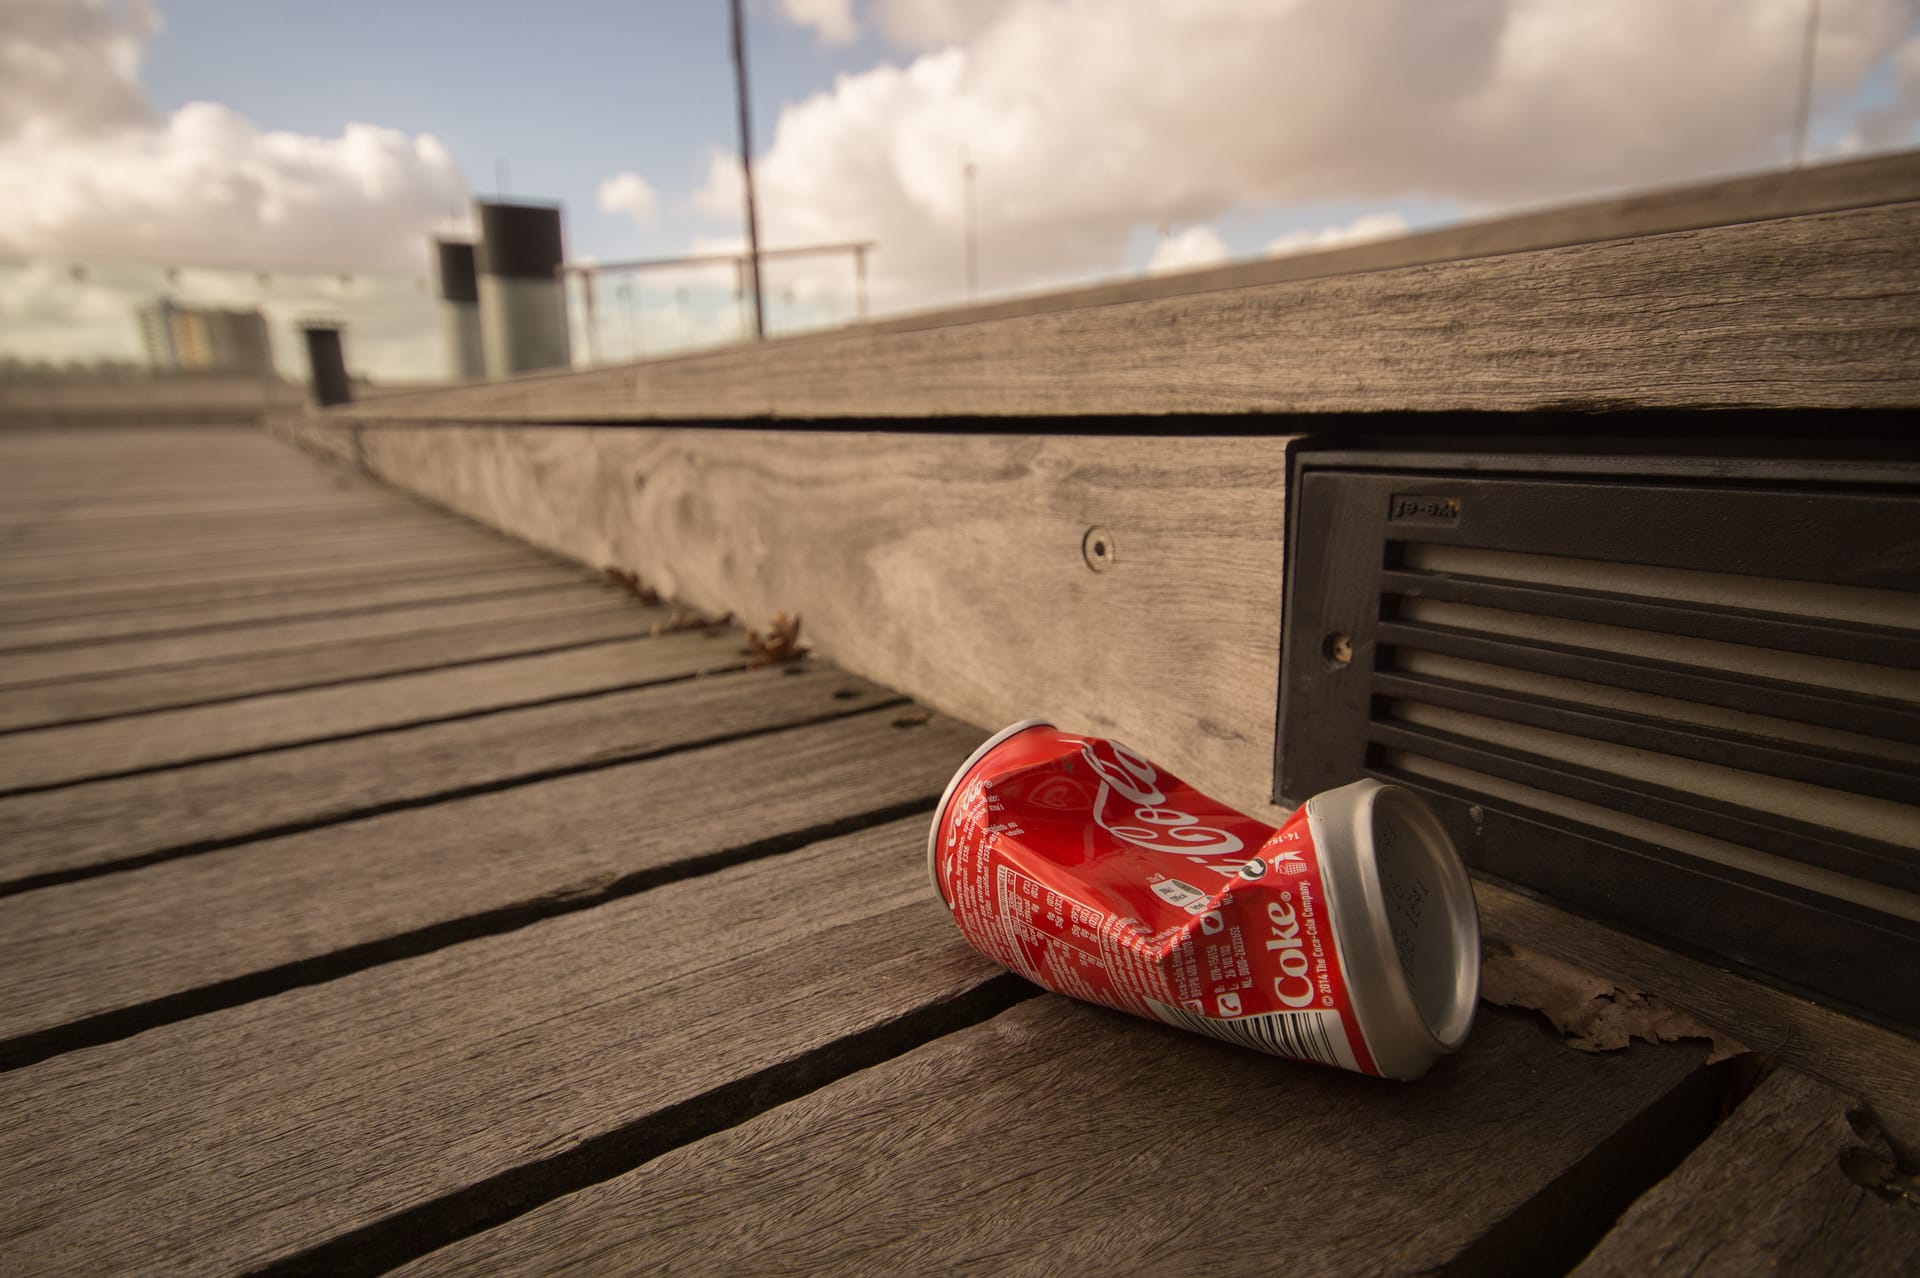 A single crushed can of coco-cola littered on the sidewalk